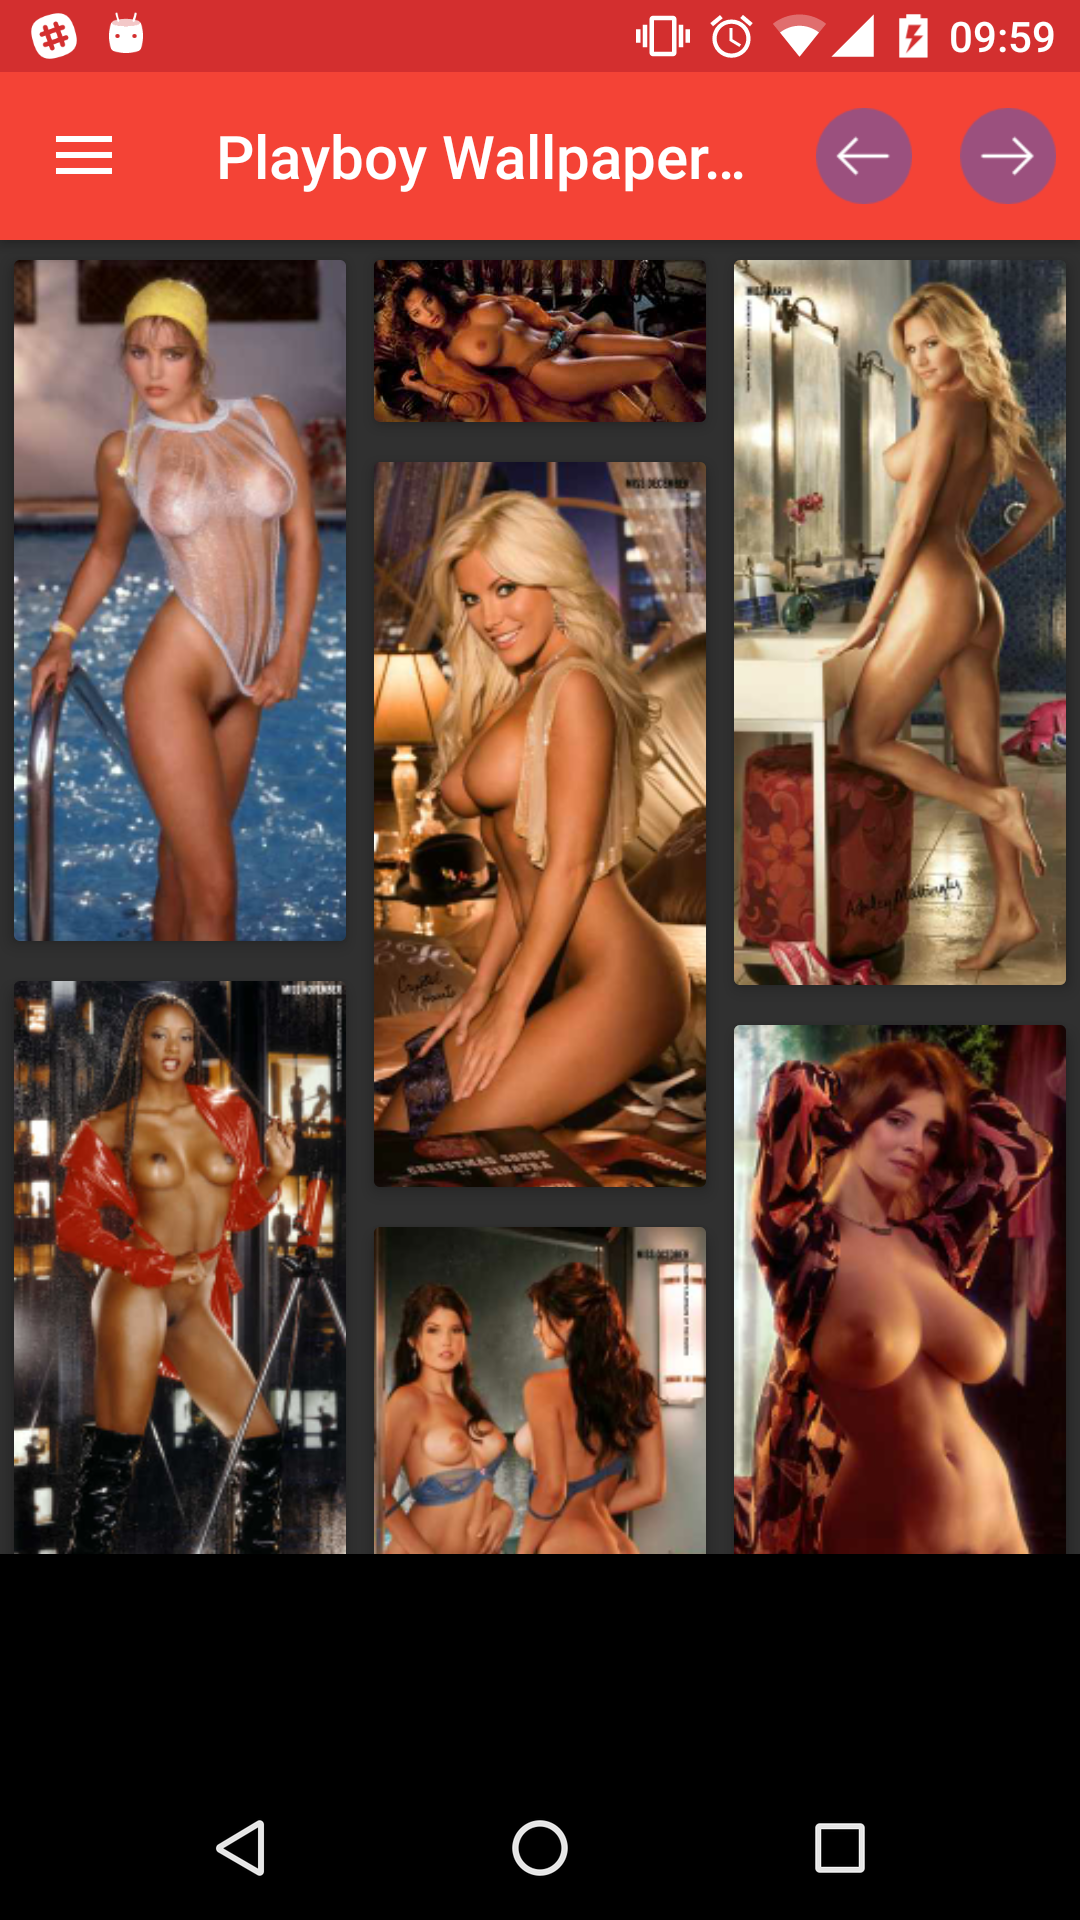 Playboy wallpapers wallpaper,centerfolds,backgrounds,live,playboy,personalization,magazine,gallery,apps,picture,sexy,best,image,apk,henati,erotic,aps,hentai,apks,pictures,manga,app,customization,top,wallpapers,download